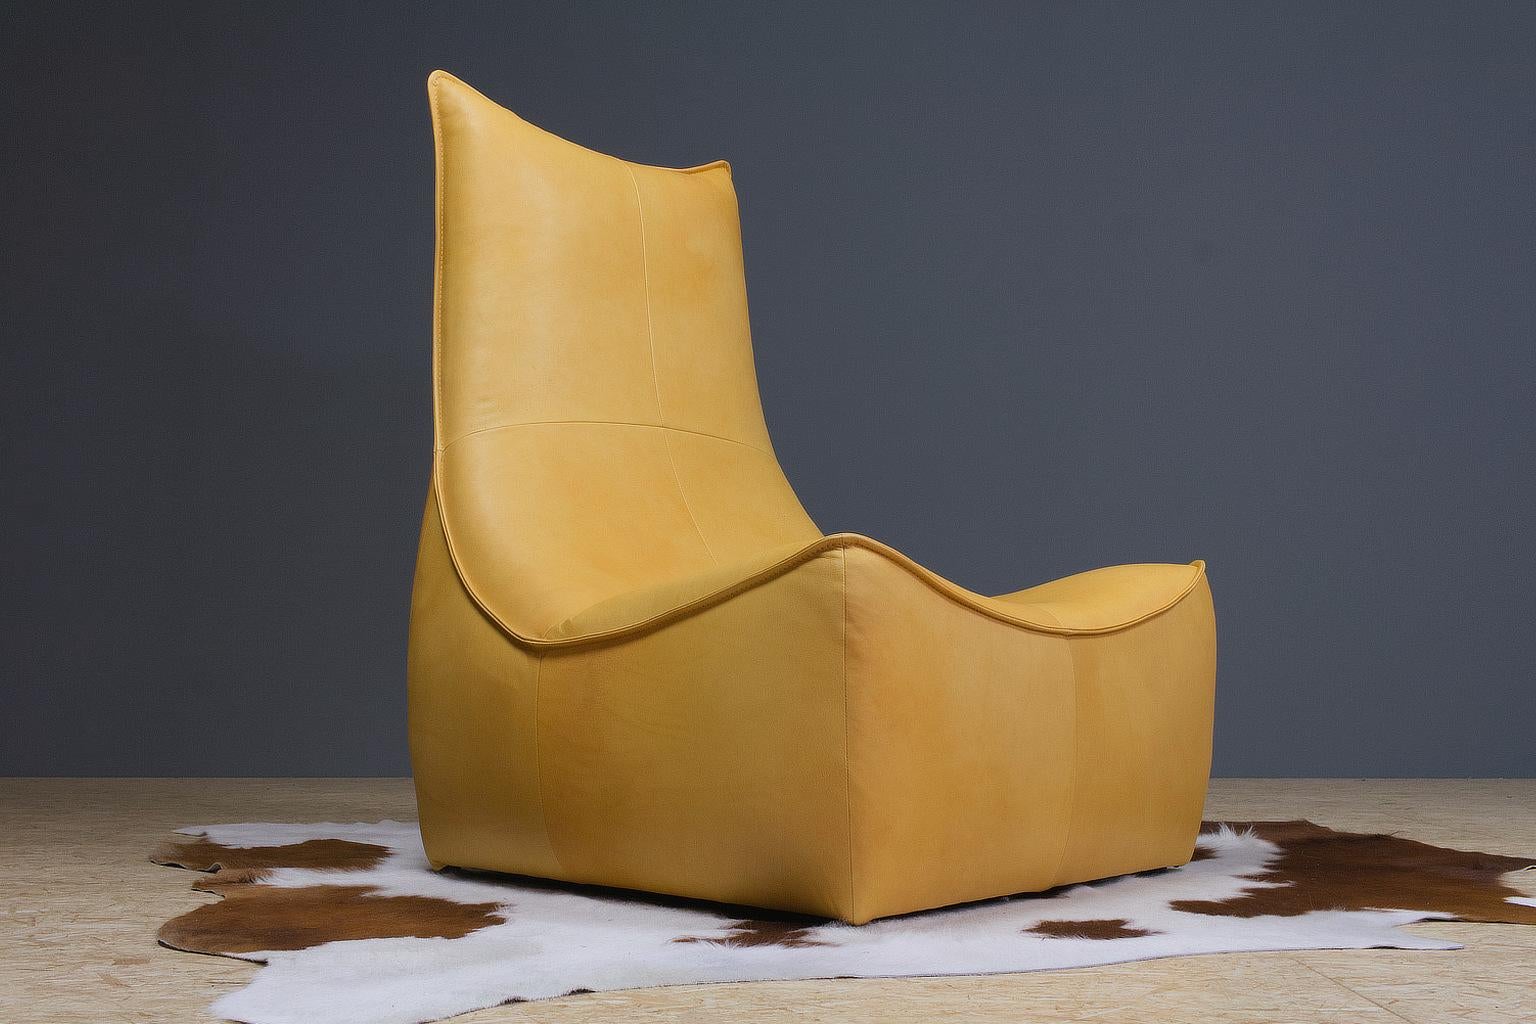 Original, comfortable and large 'Rock' lounge chair in tan (or cognac) colored aniline leather Gerard Van Den Berg designed this large and eye-catching piece for Dutch furniture producer Montis in 1970.

This piece is completely restored. New